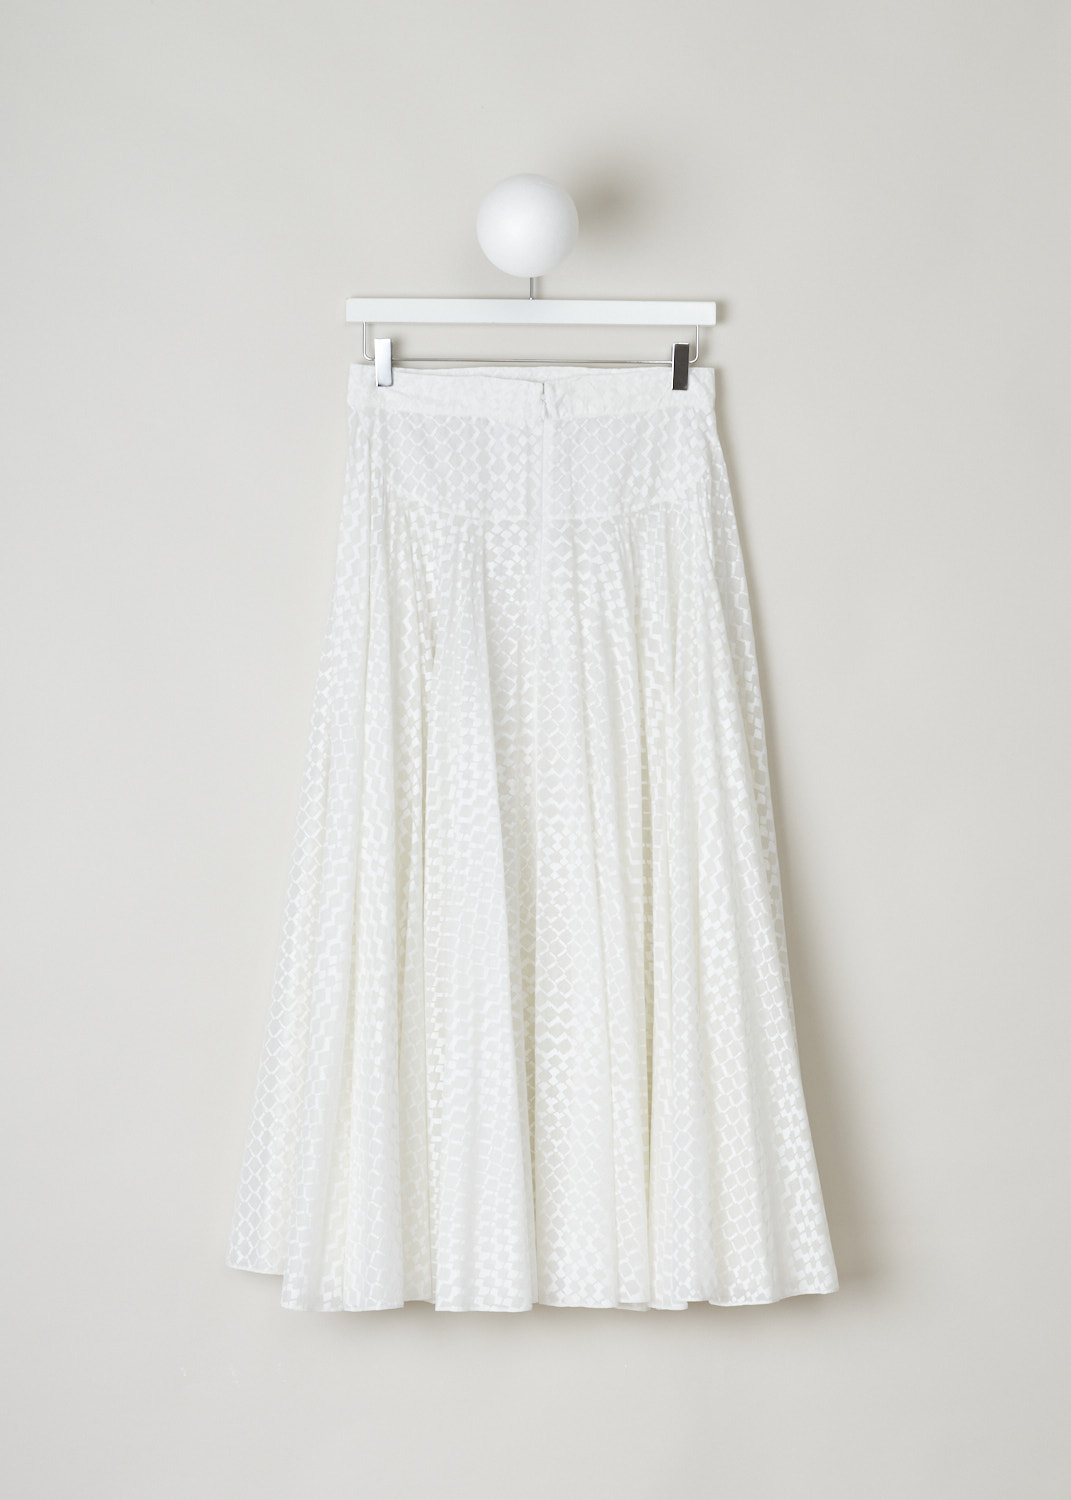 Alaïa, Off-white slightly see-through tulle skirt, AS9J648TT314_C000_blanc, white, back, Made from thinly woven cotton and is slightly see-through, embellished with a white lozenge motif. The length of the skirt comes to about ankle height.